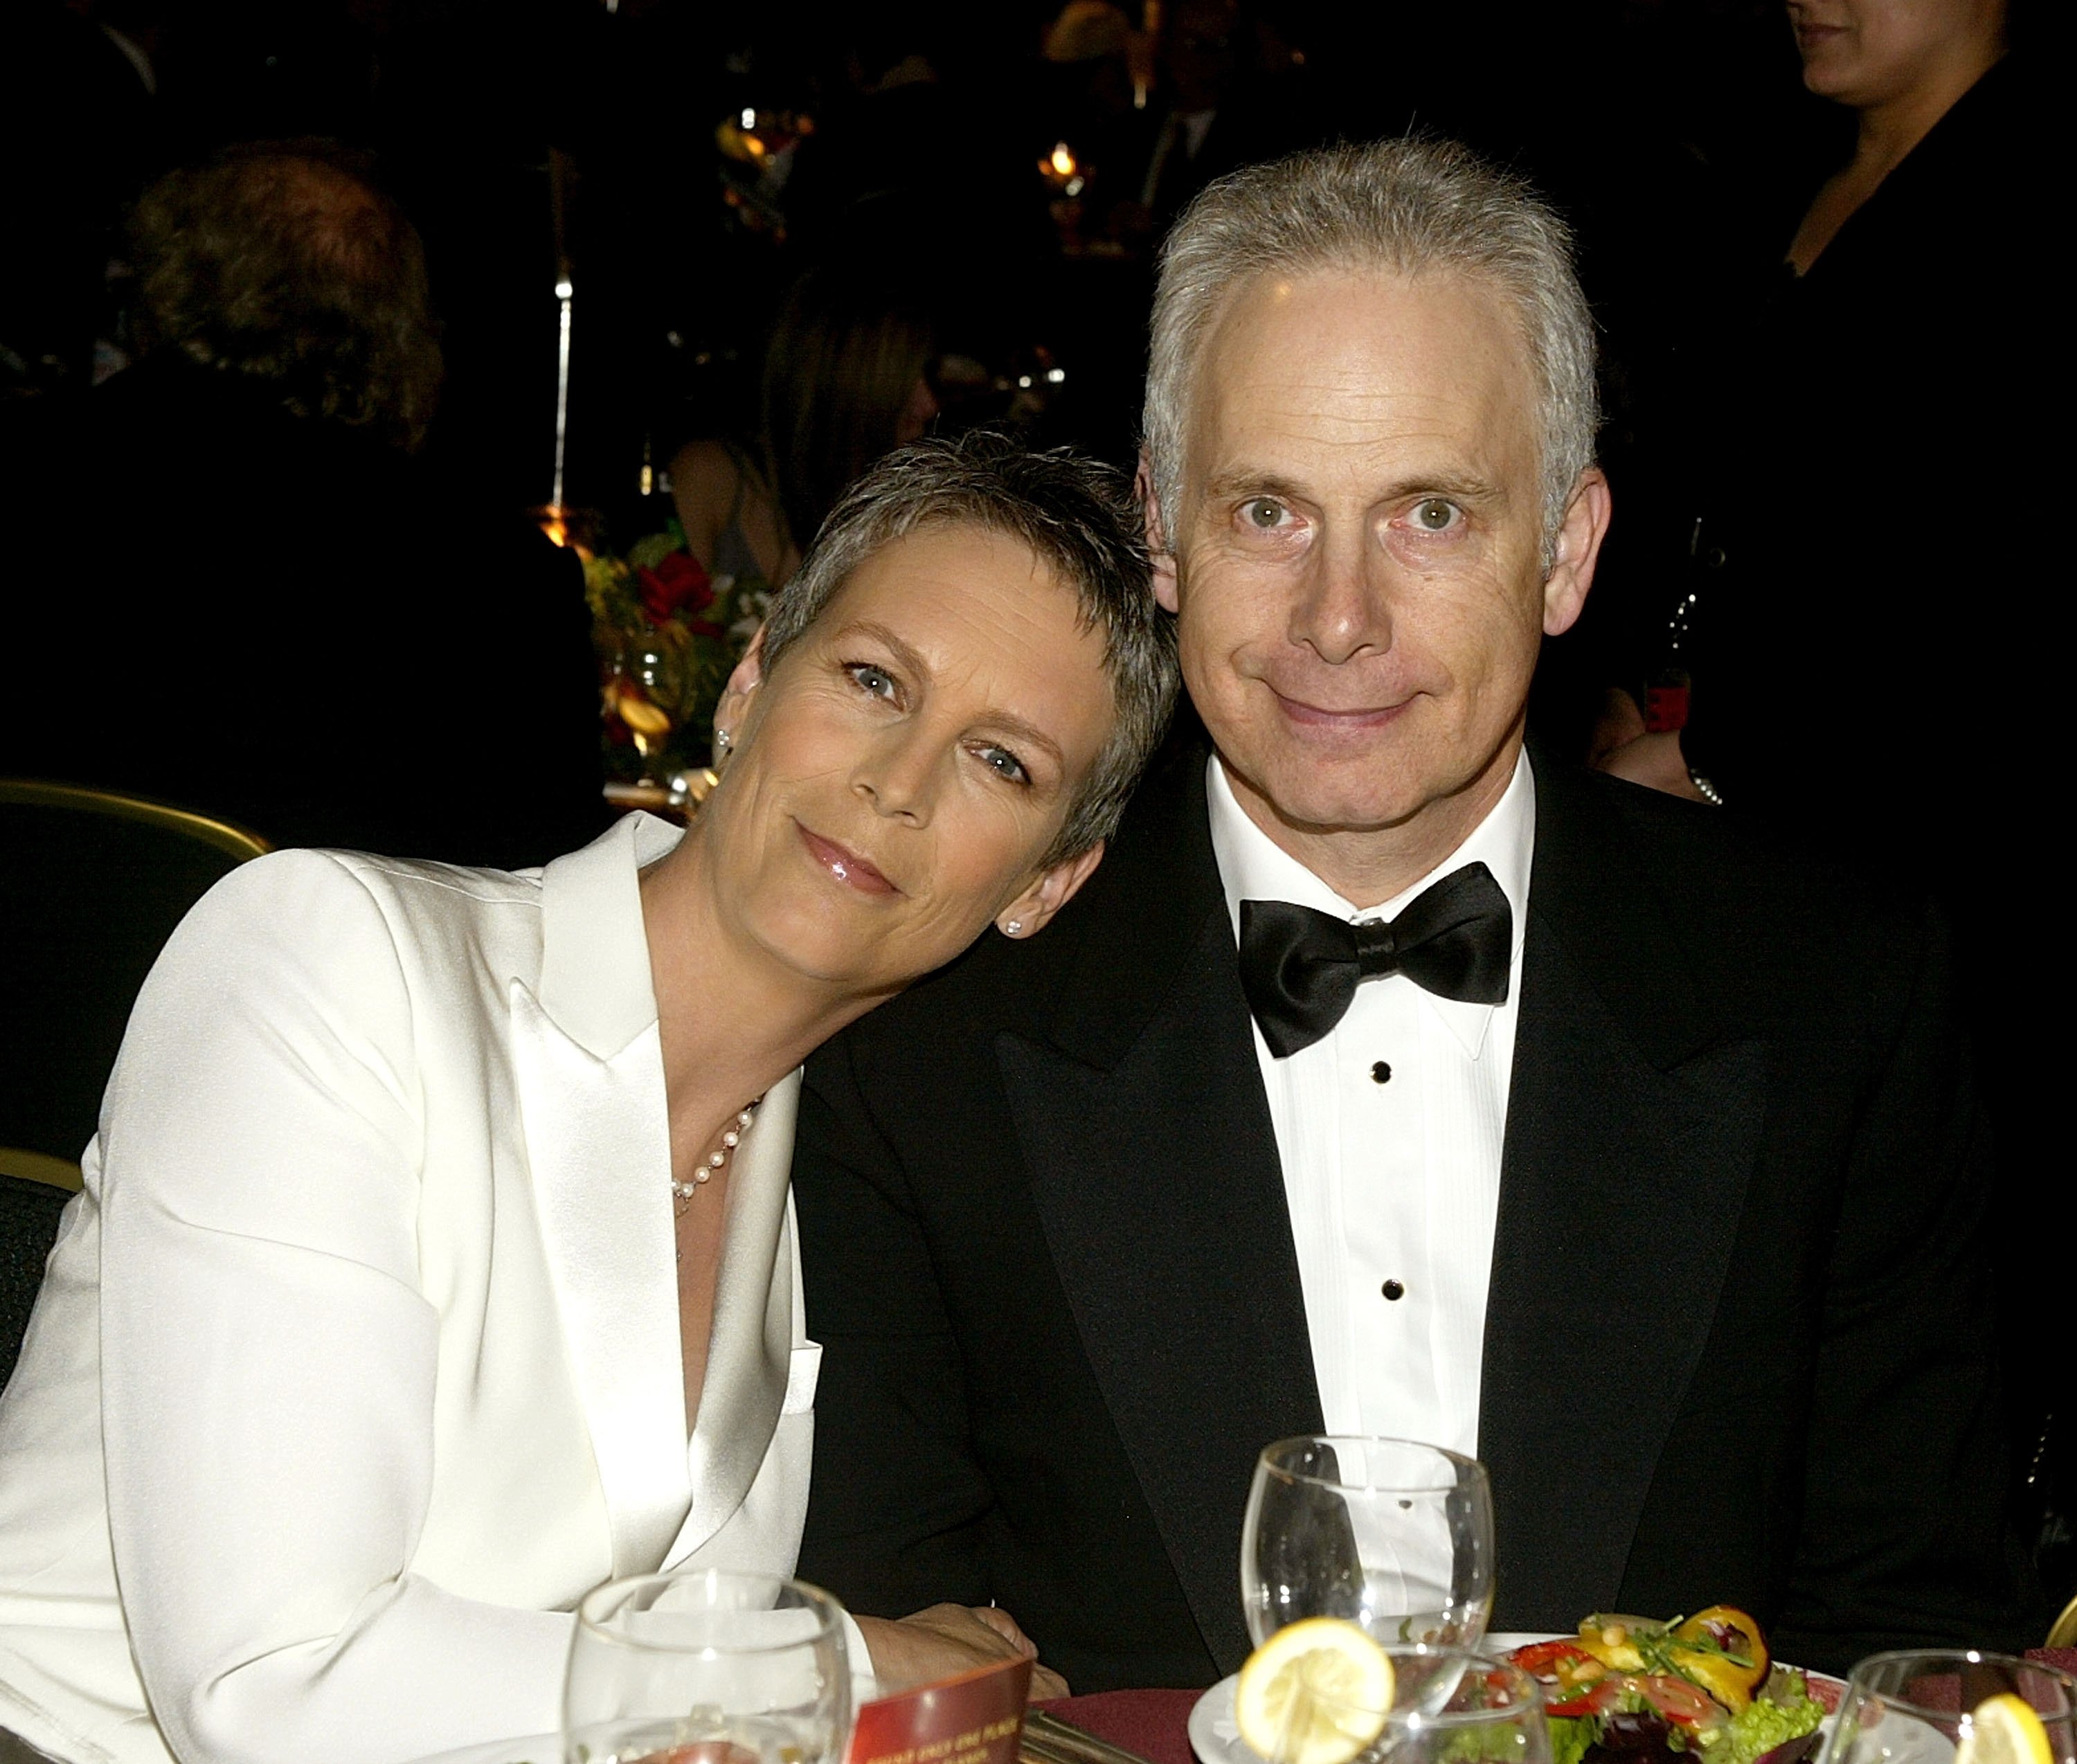 Jamie Lee Curtis and her husband, Christopher Guest, attend the 6th Annual Costume Guild Awards reception at the Beverly Hilton Hotel on February 21, 2004, in Beverly Hills, California. | Source: Getty Images